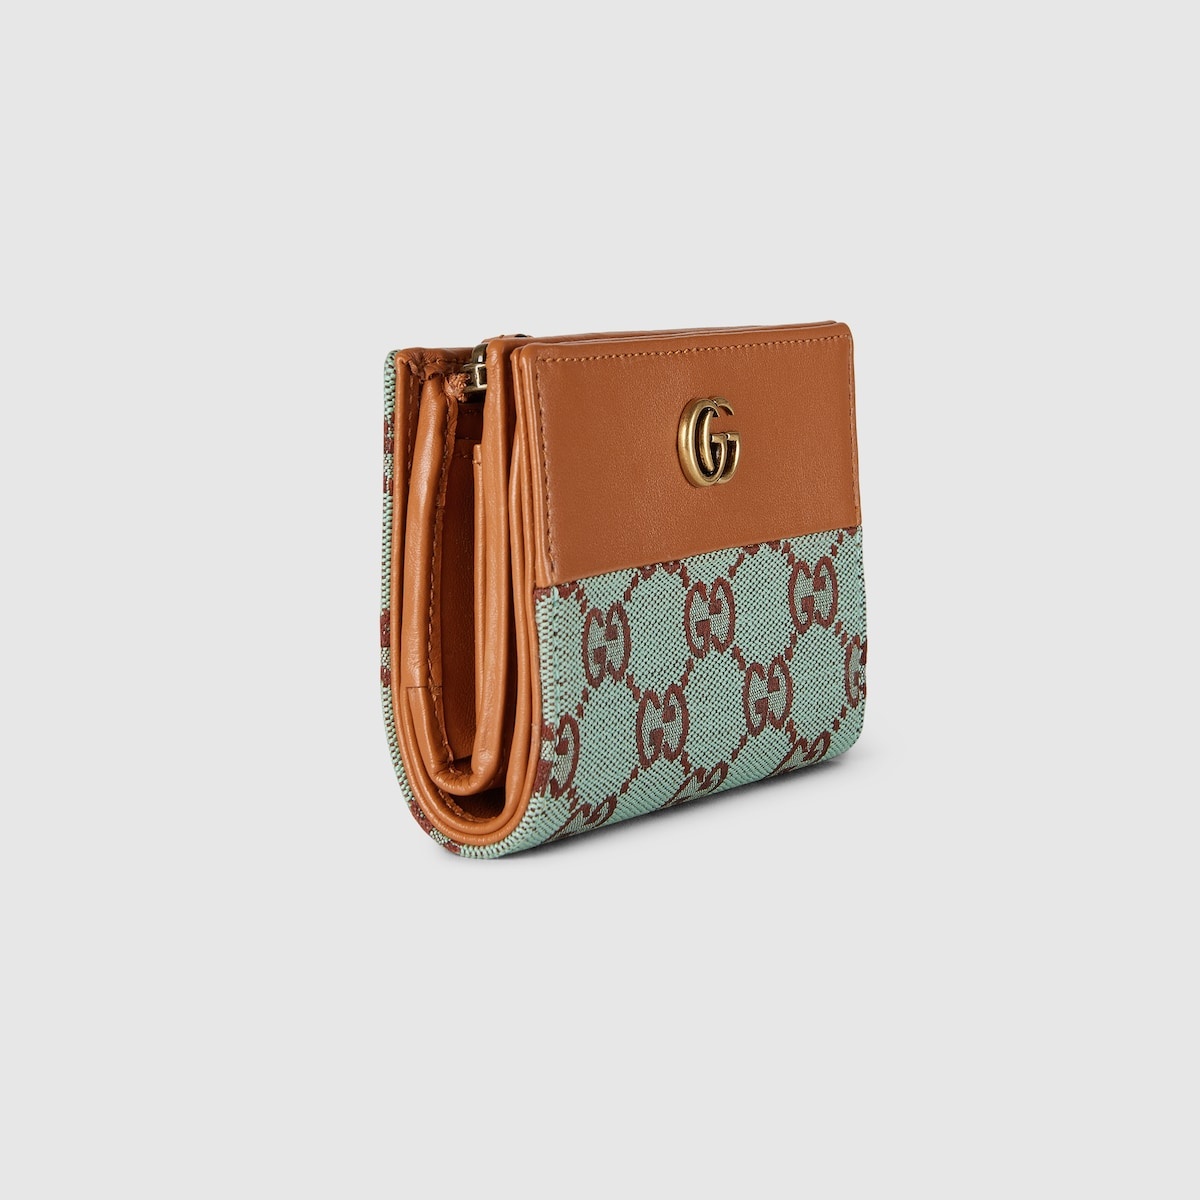 GG wallet with coin pocket - 4